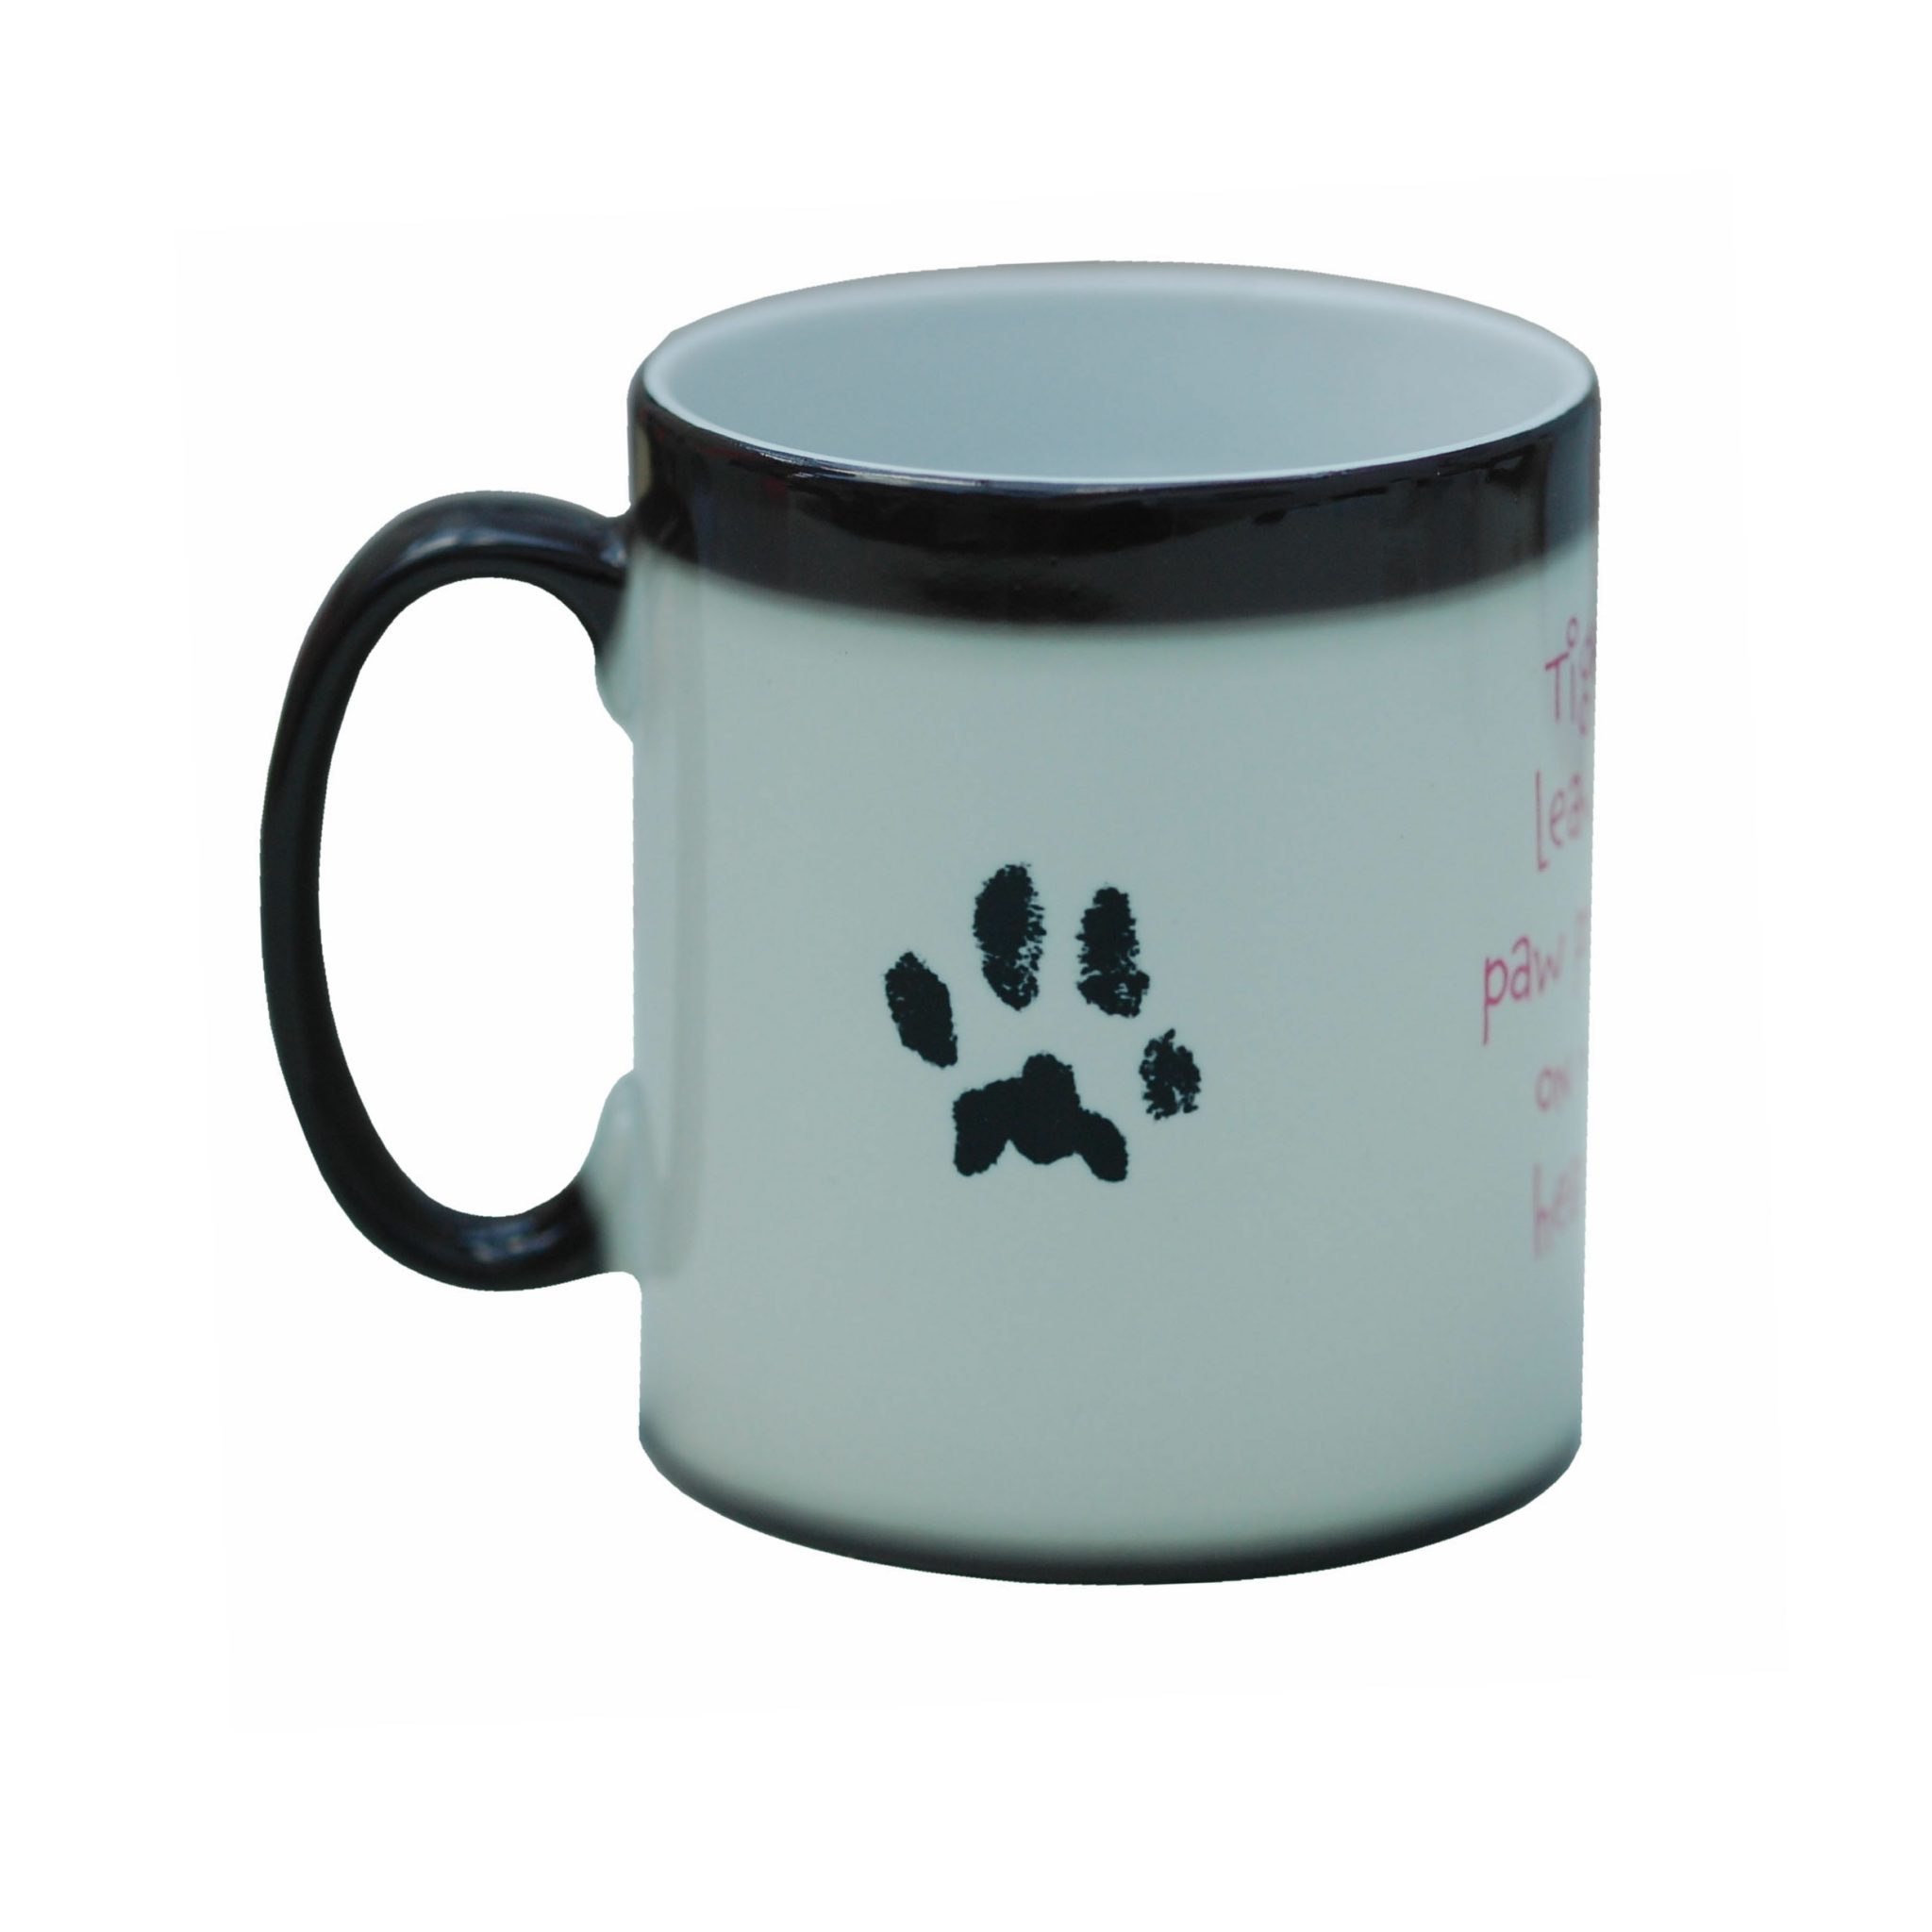 Colour change mug personalised with paw print and photo